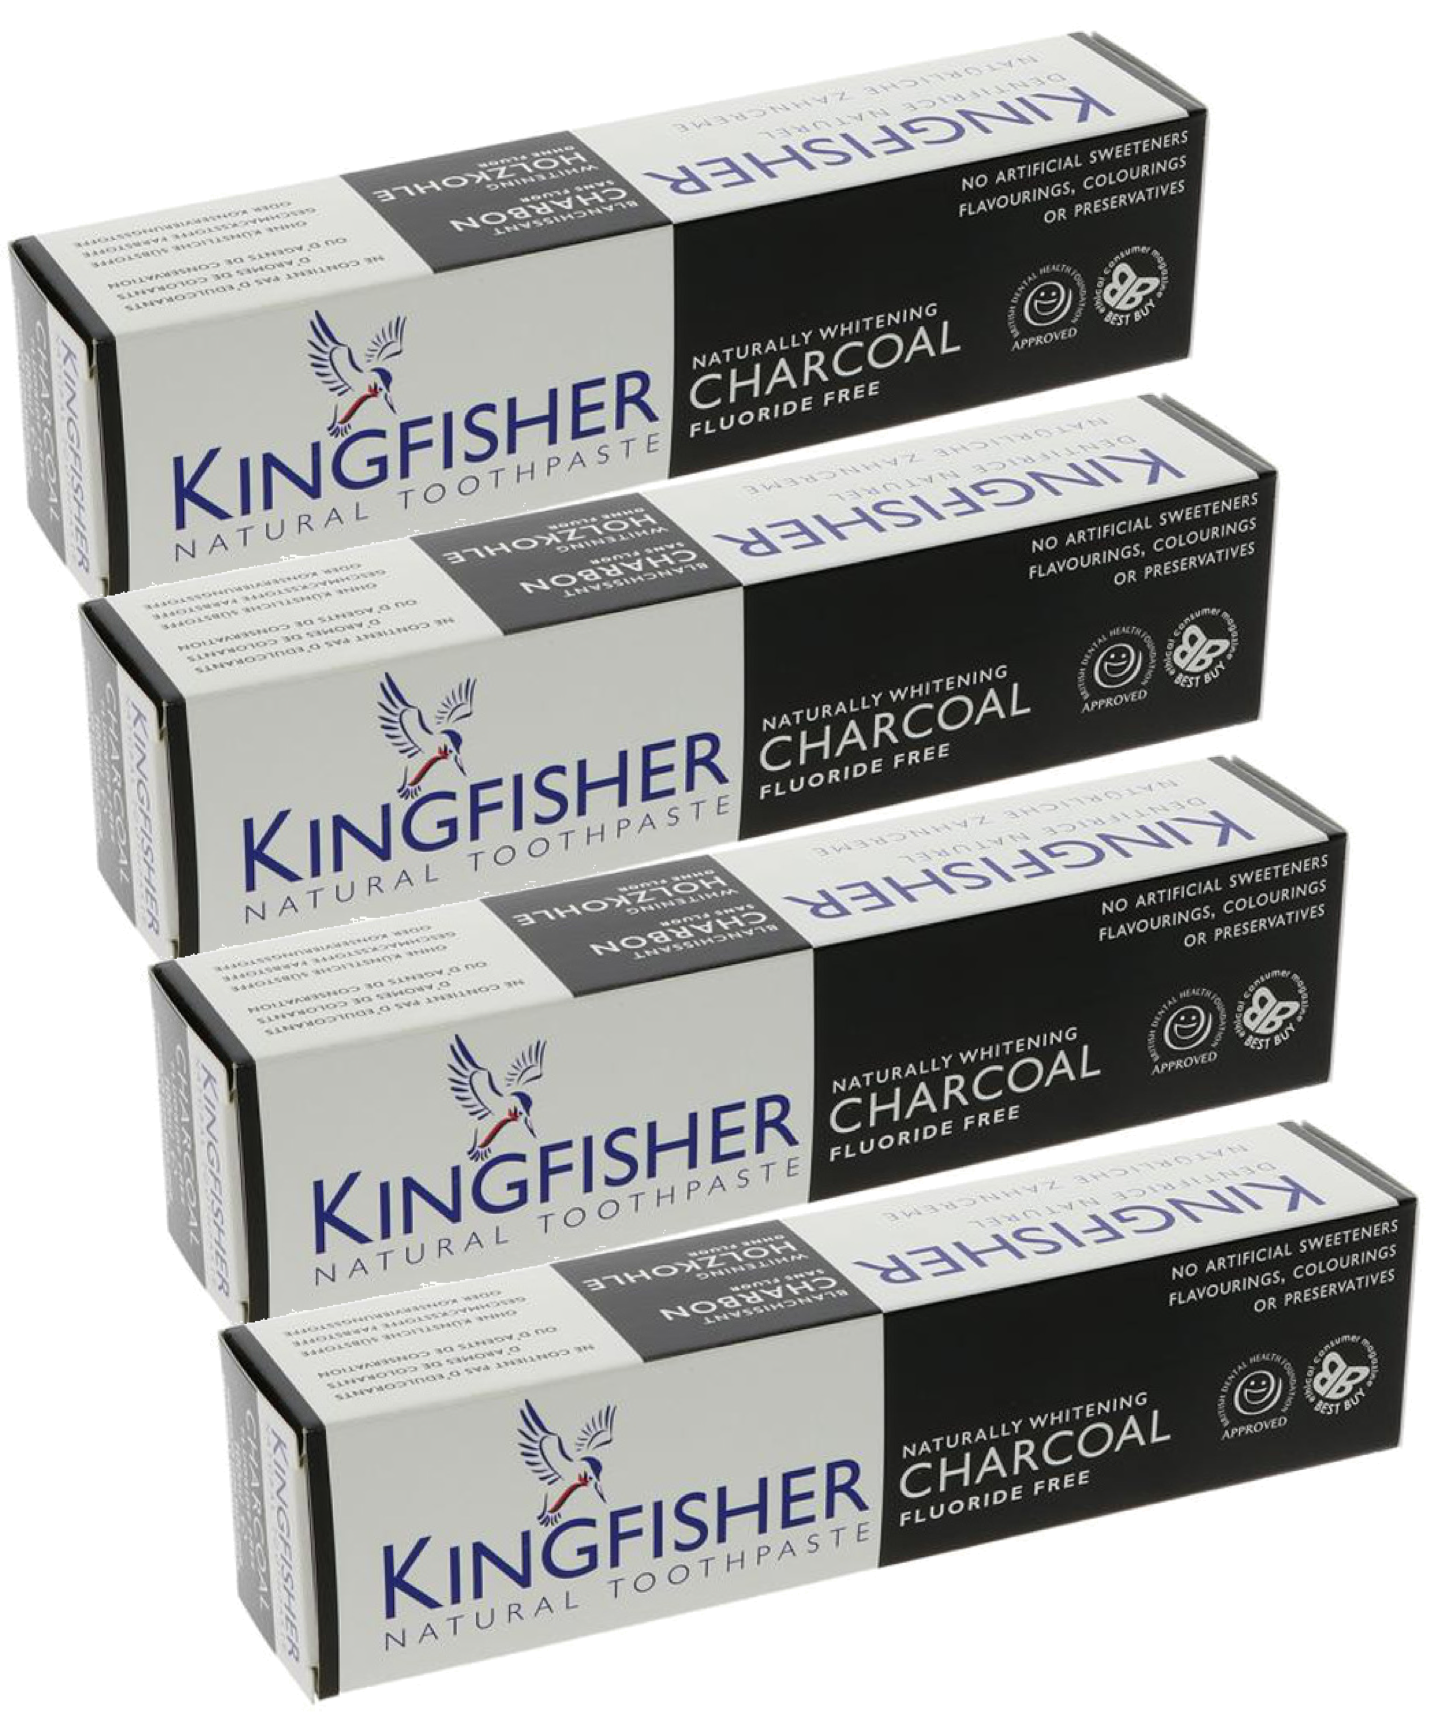 Kingfisher Toothpaste - Charcoal Naturally Whitening Fluoride Free Toothpaste (100ml) - Pack of 4